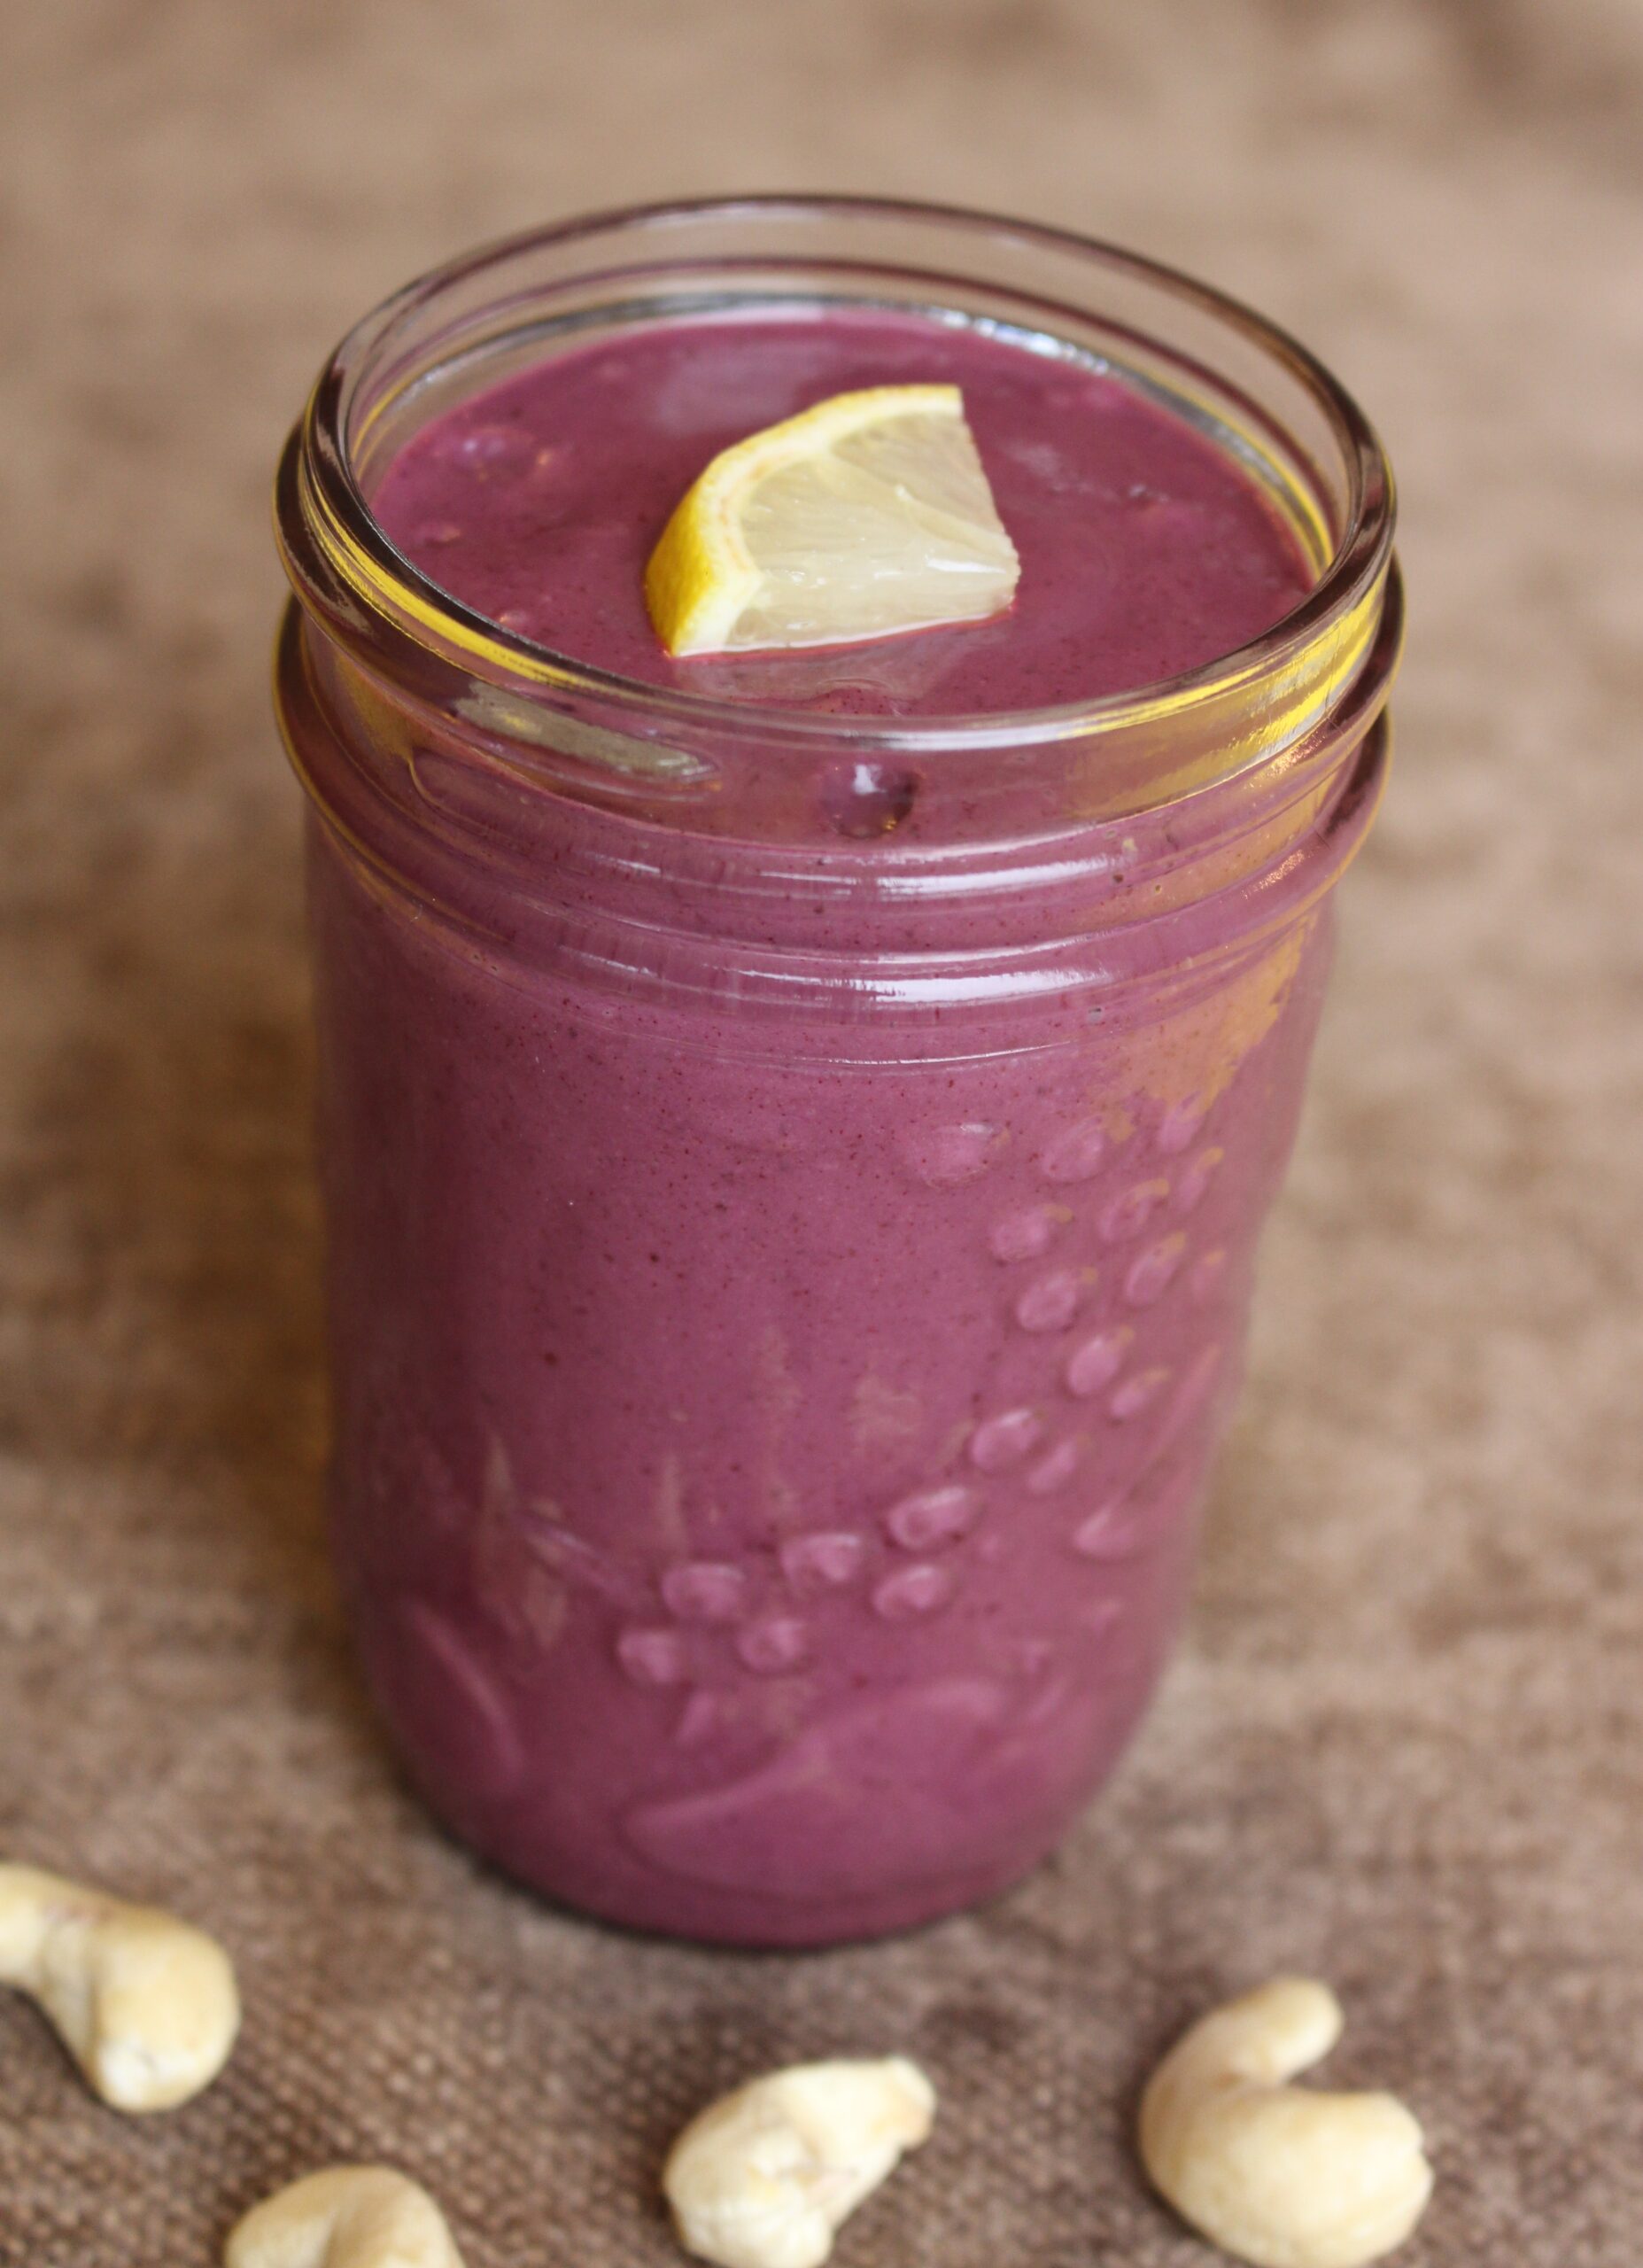 Cherry smoothie with lemon, dates and cashews